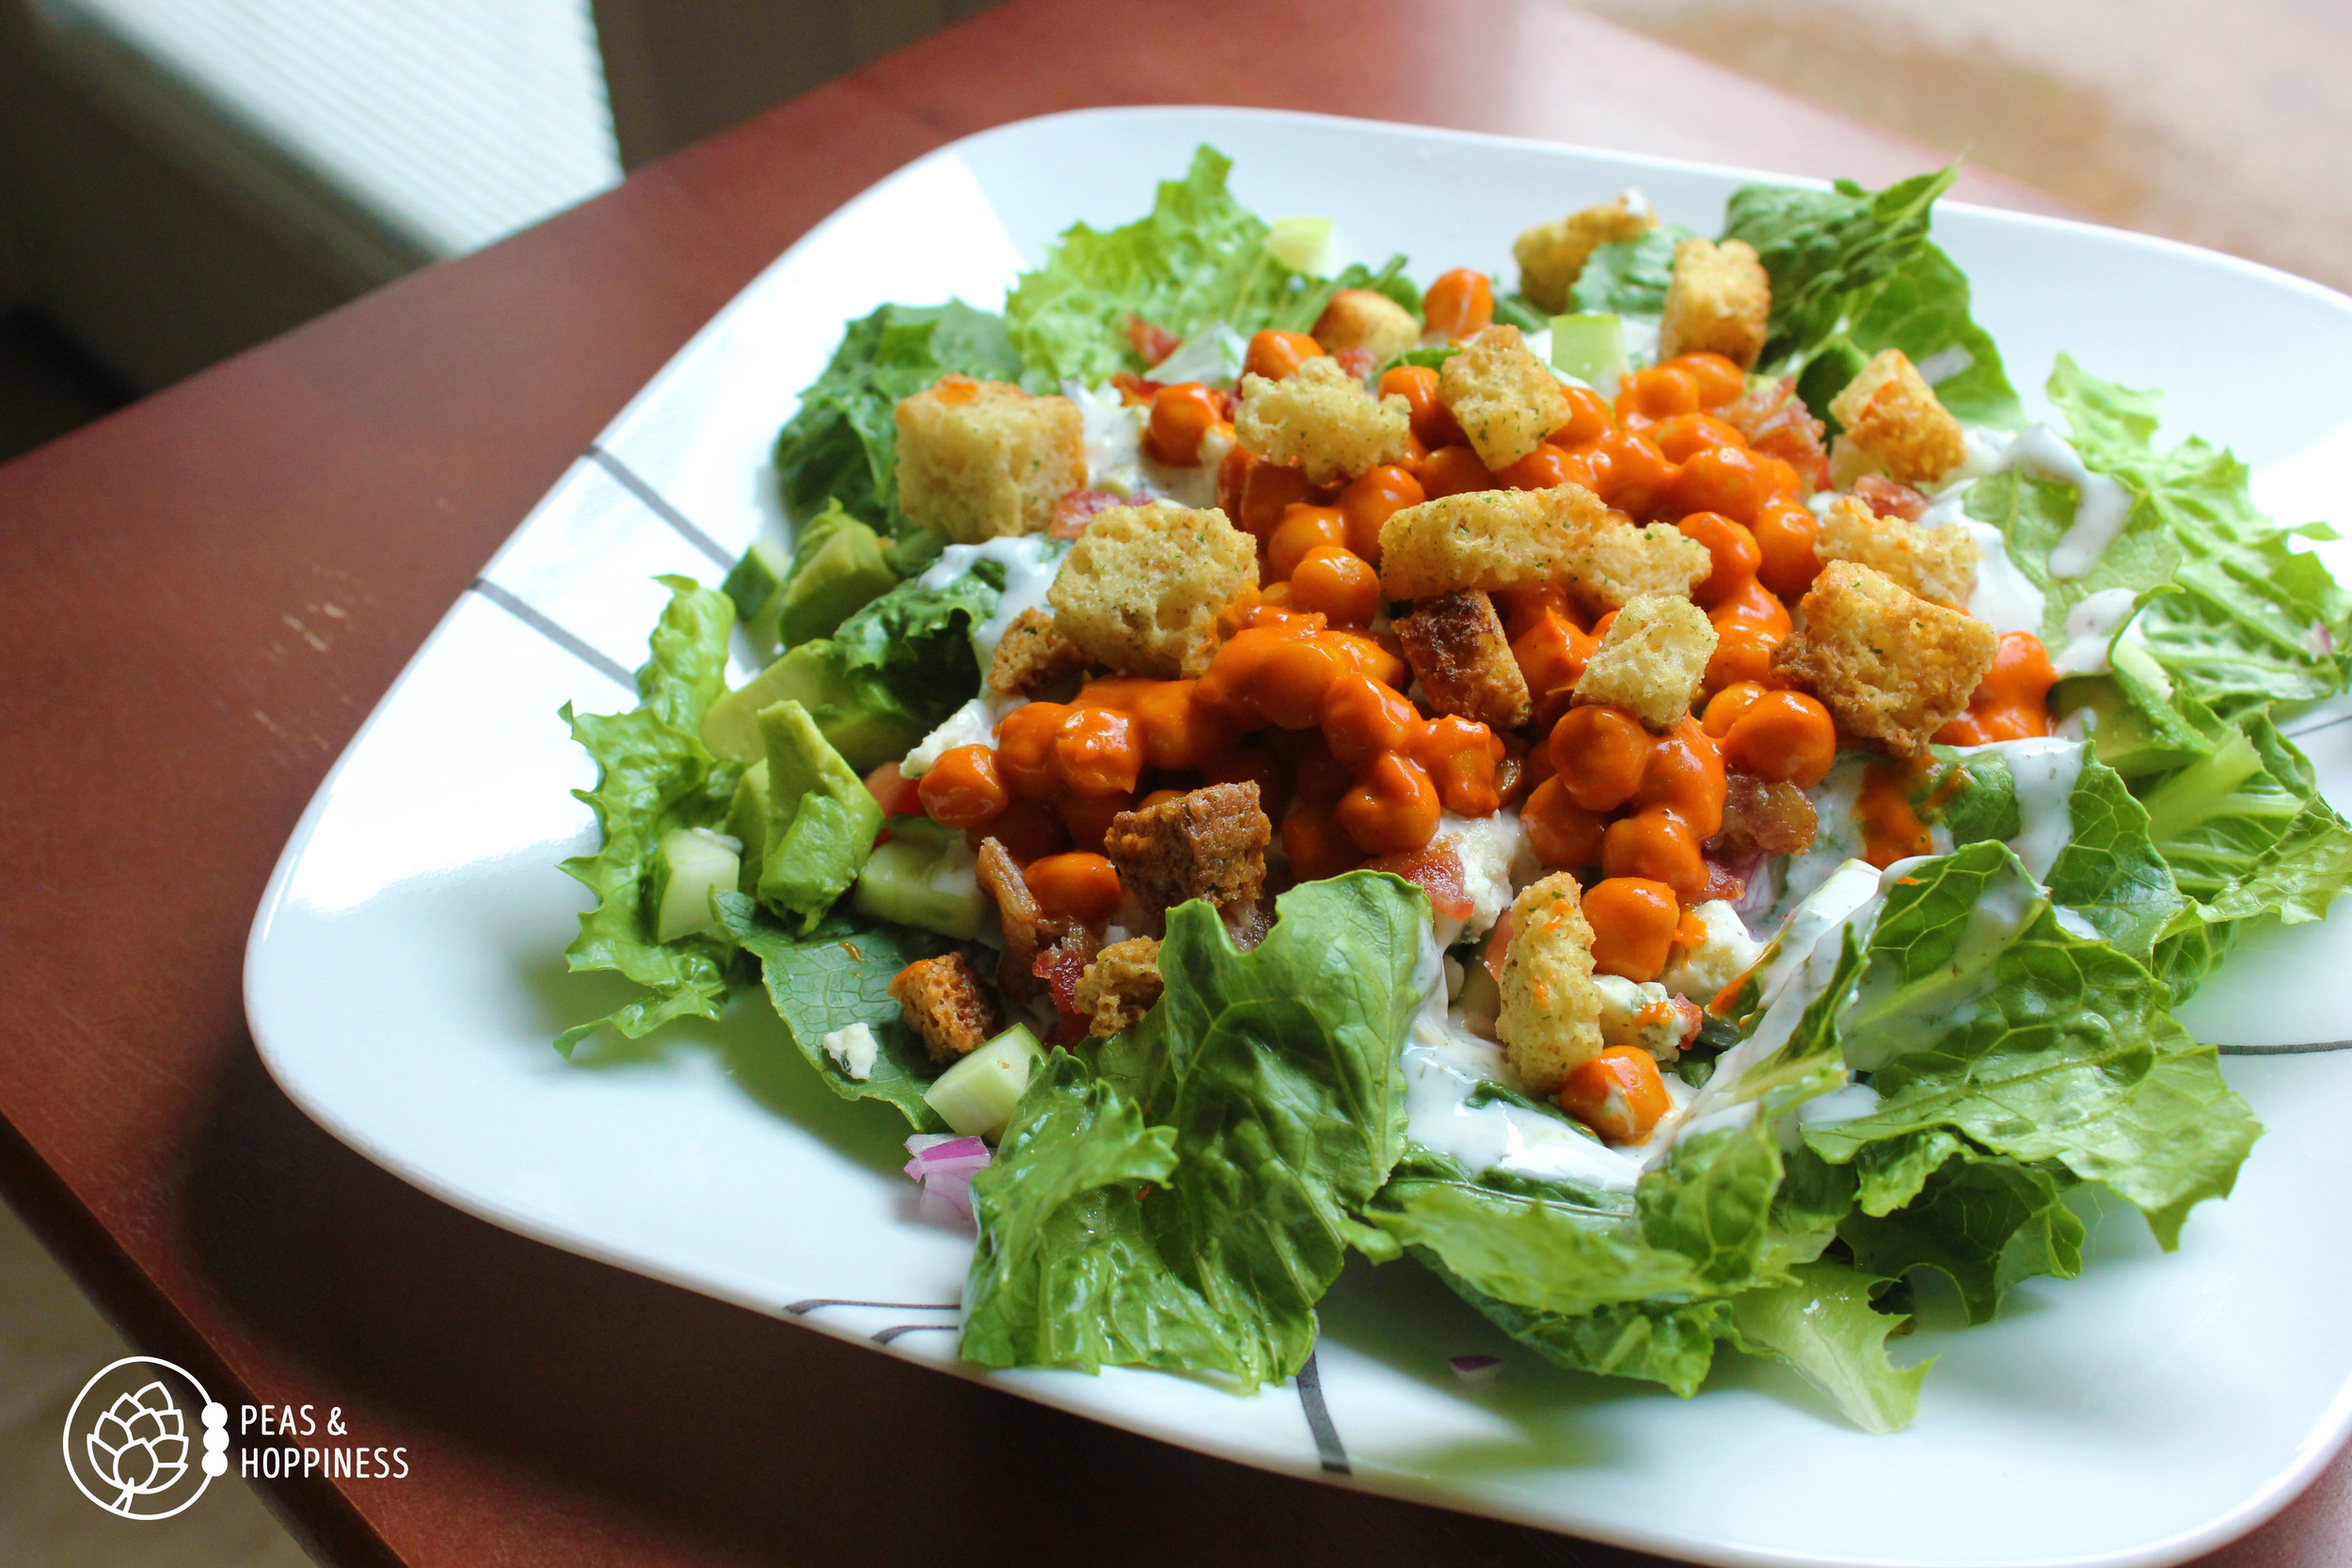 Buffalo Chickpea Salad from Peas and Hoppiness - www.peasandhoppiness.com